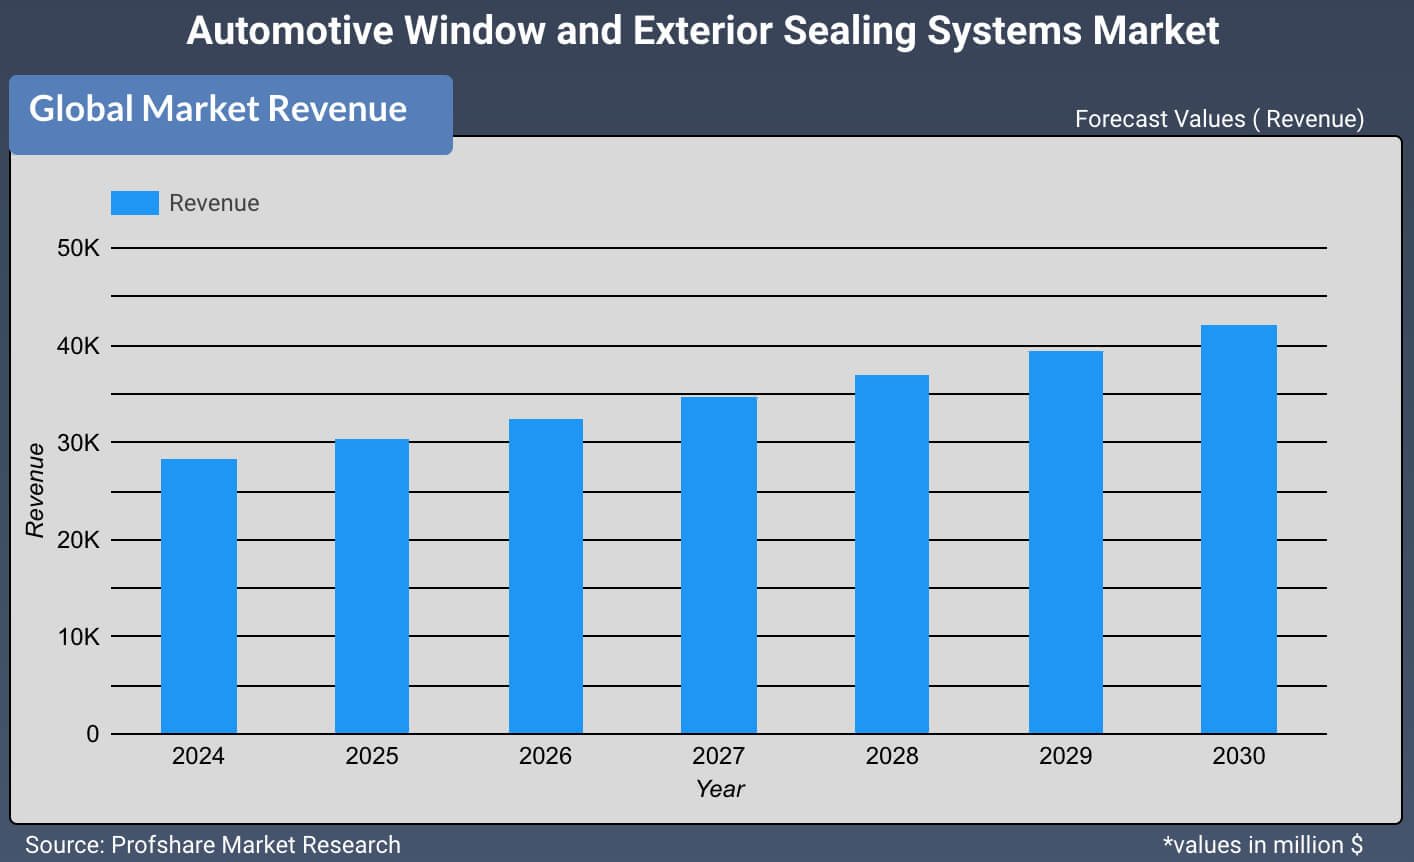 Automotive Window and Exterior Sealing Systems Market 